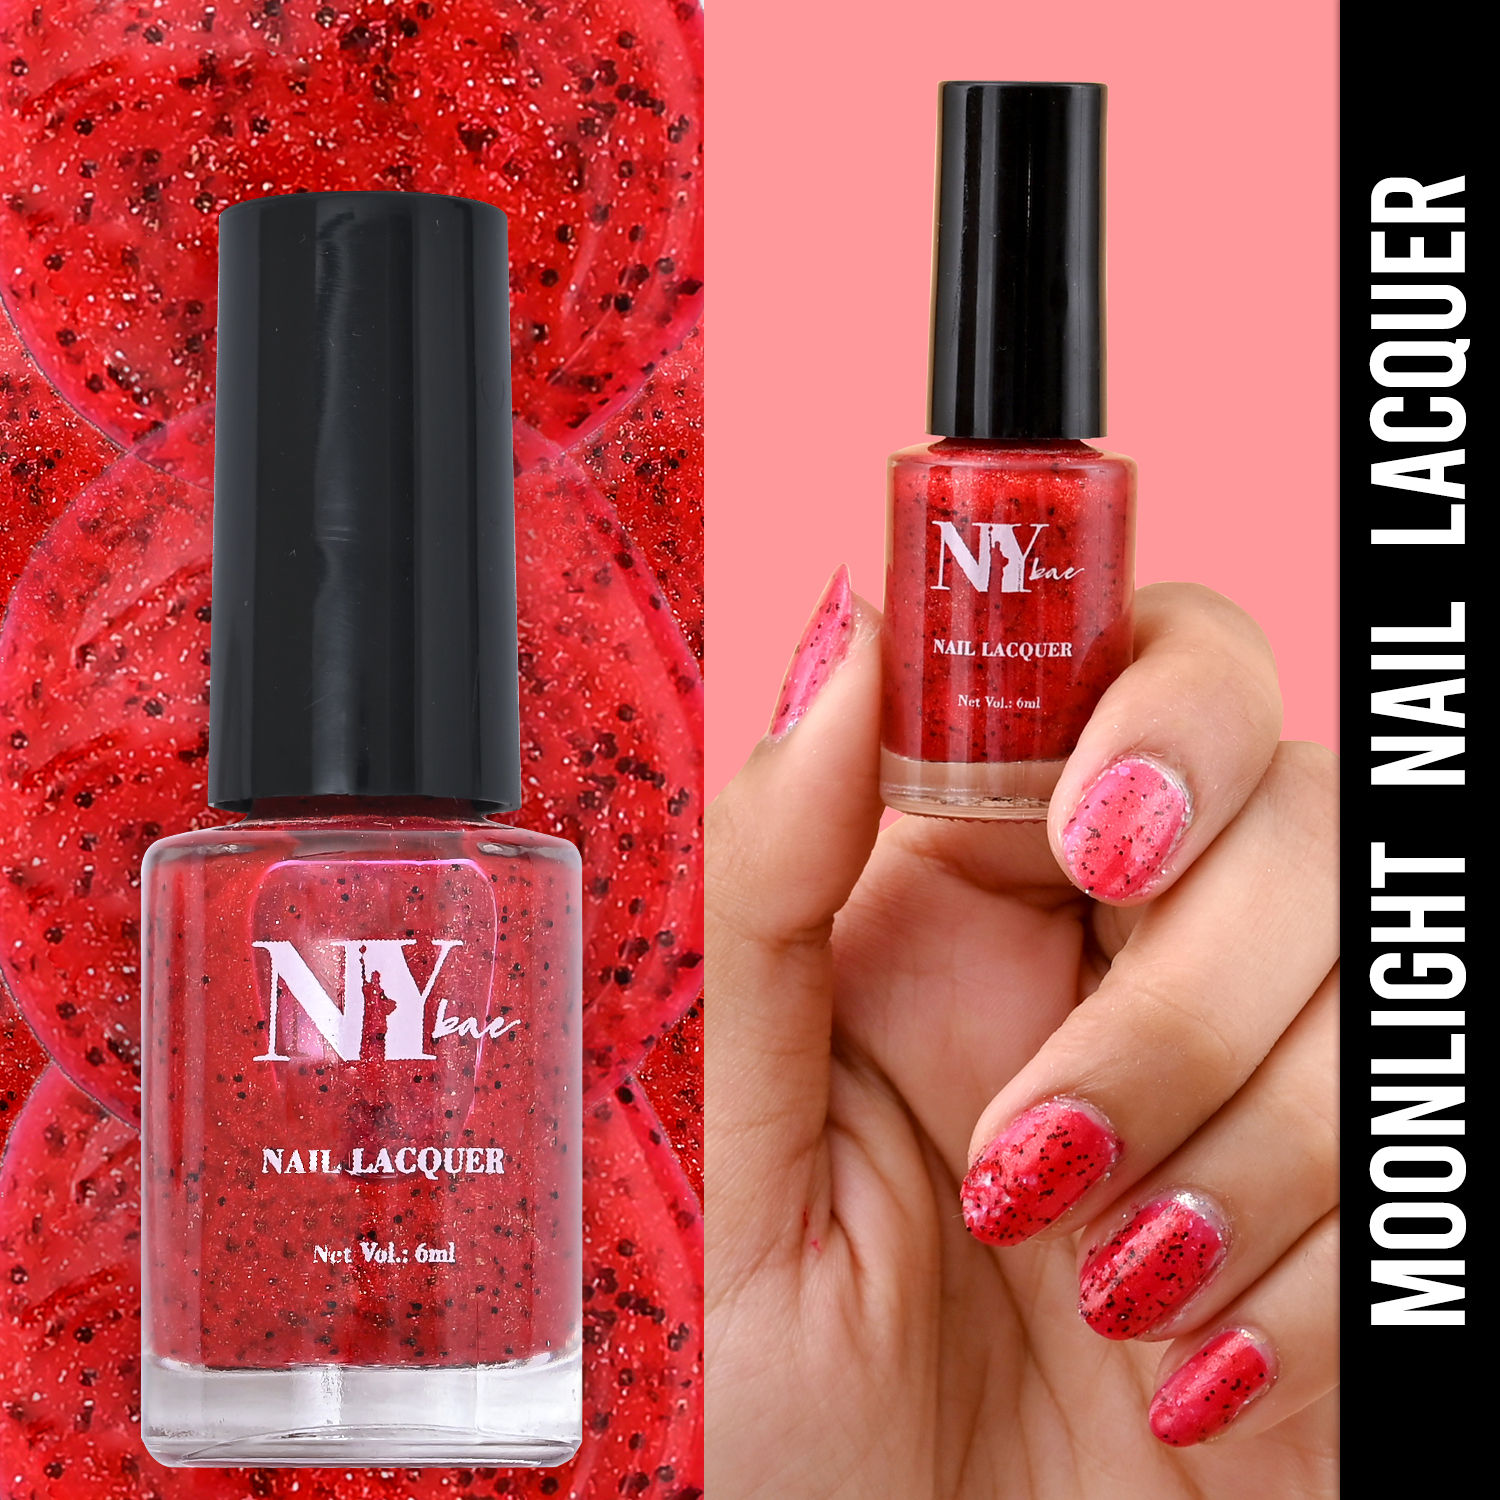 NY Bae Nail Lacquer, Glitter, Pink, Moonlight - Woolworth Moonlight 23 (6  ml)